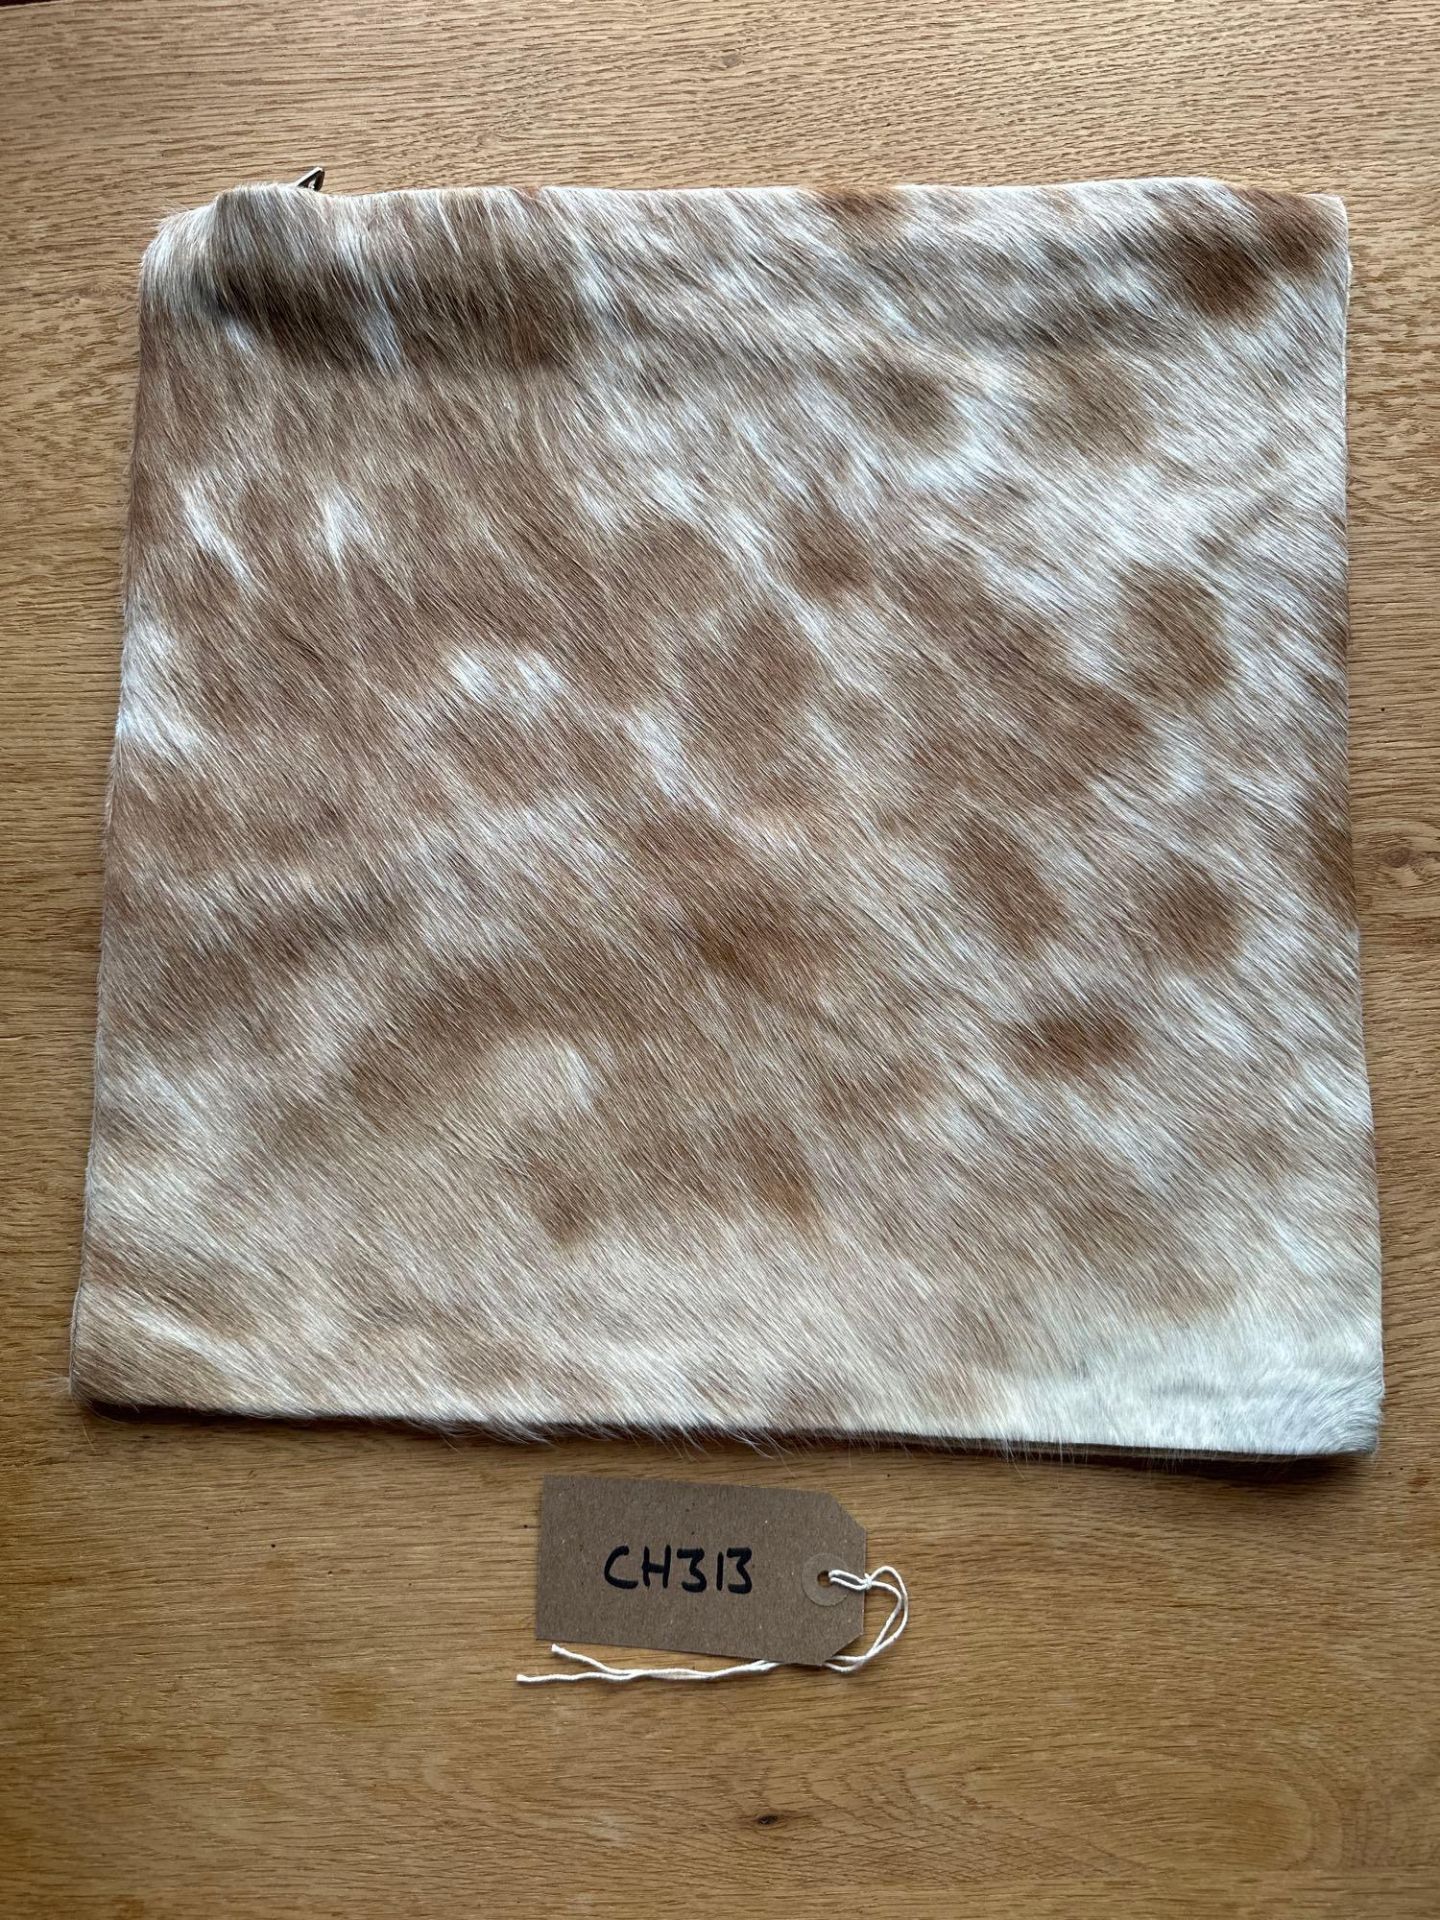 Cowhide Leather Cushion Cover 100% NaturalÂ Cowhide Leather Cushion Is Single-Sided And Rich In